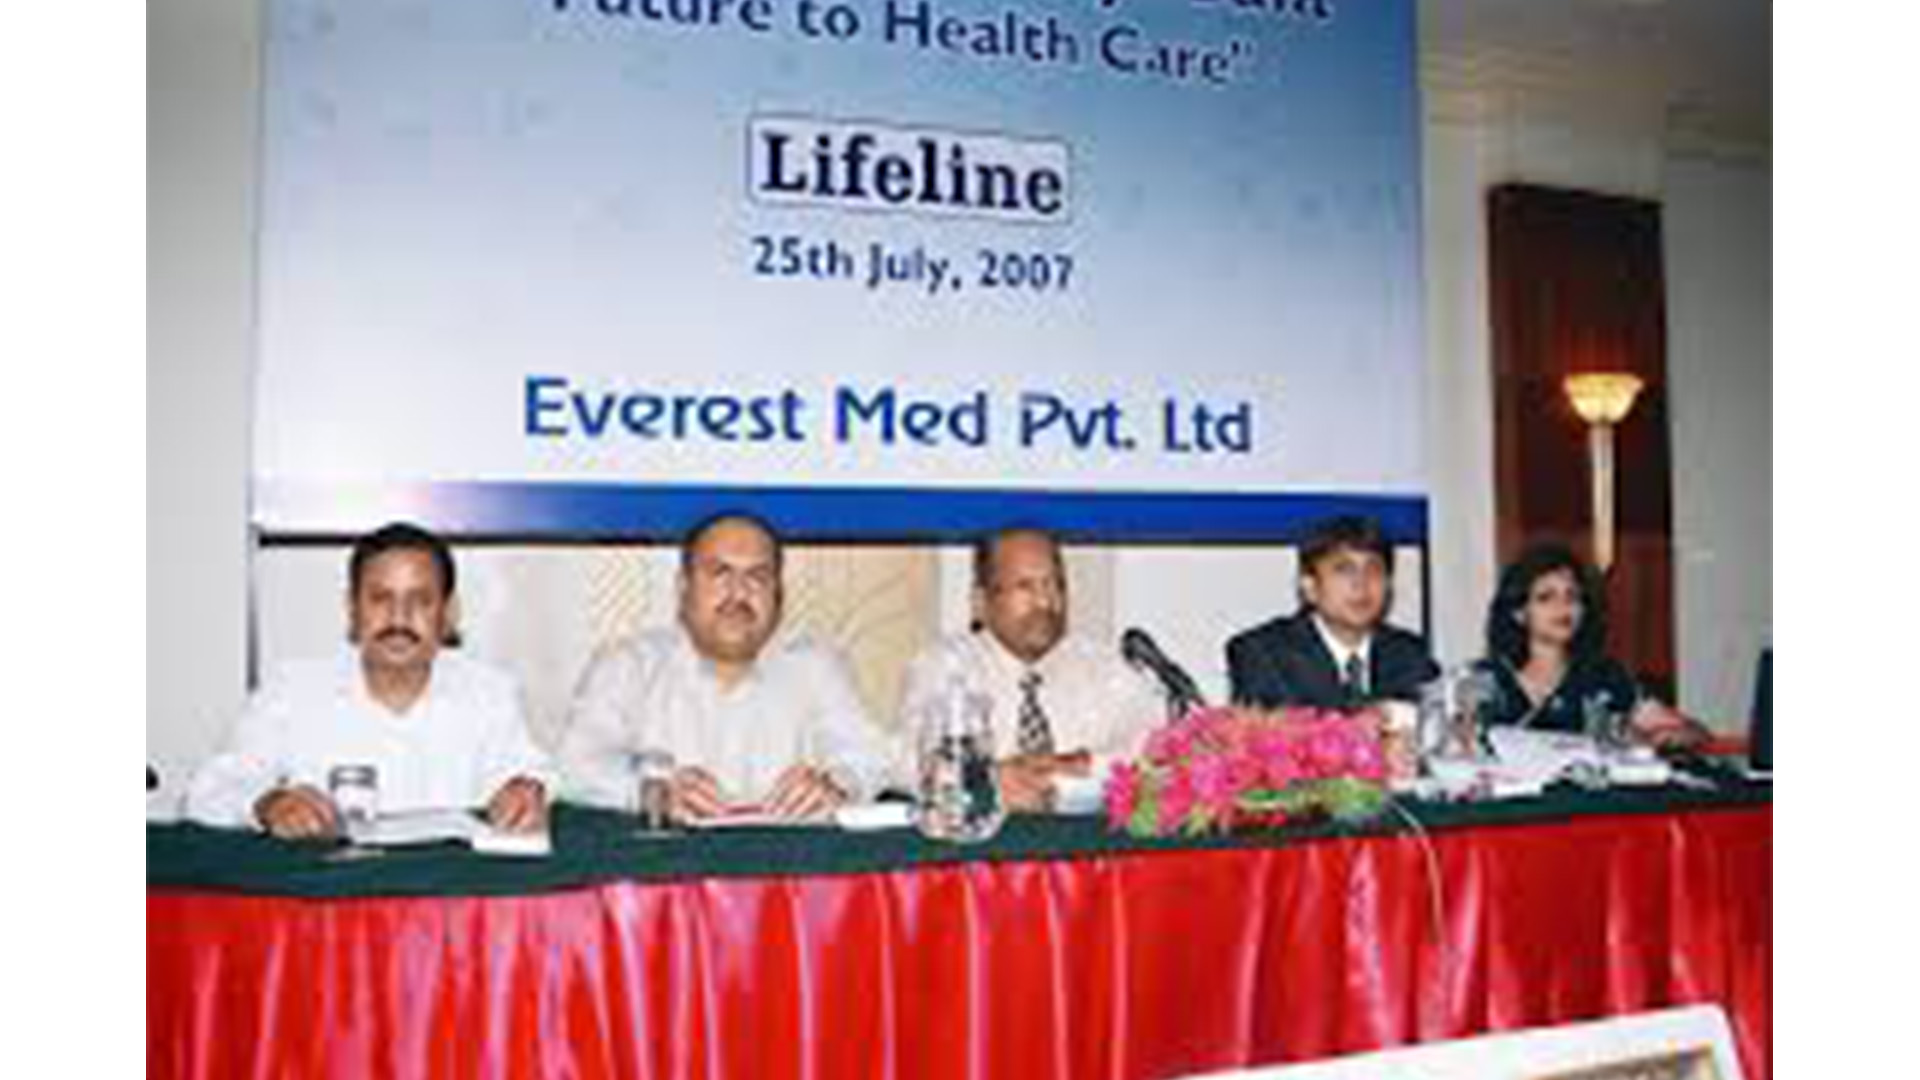 Everest Med Pvt. Ltd. transfers health items from Lifeline and Top Glove to government